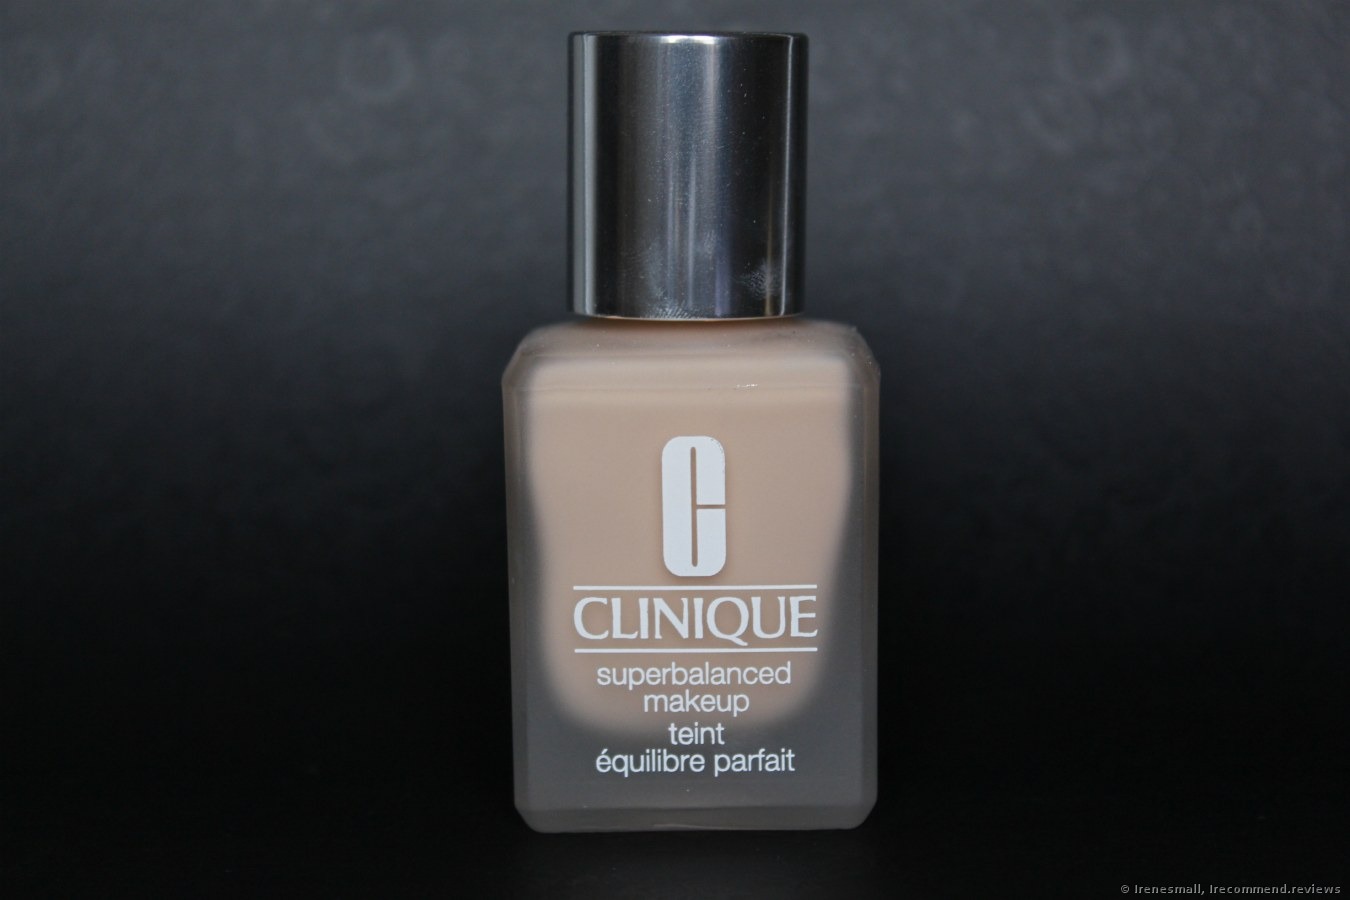 Clinique Super Balanced Makeup Foundation - so excited about this foundation, has a lightweight and great coverage. Shade 01 Petal» | Consumer reviews